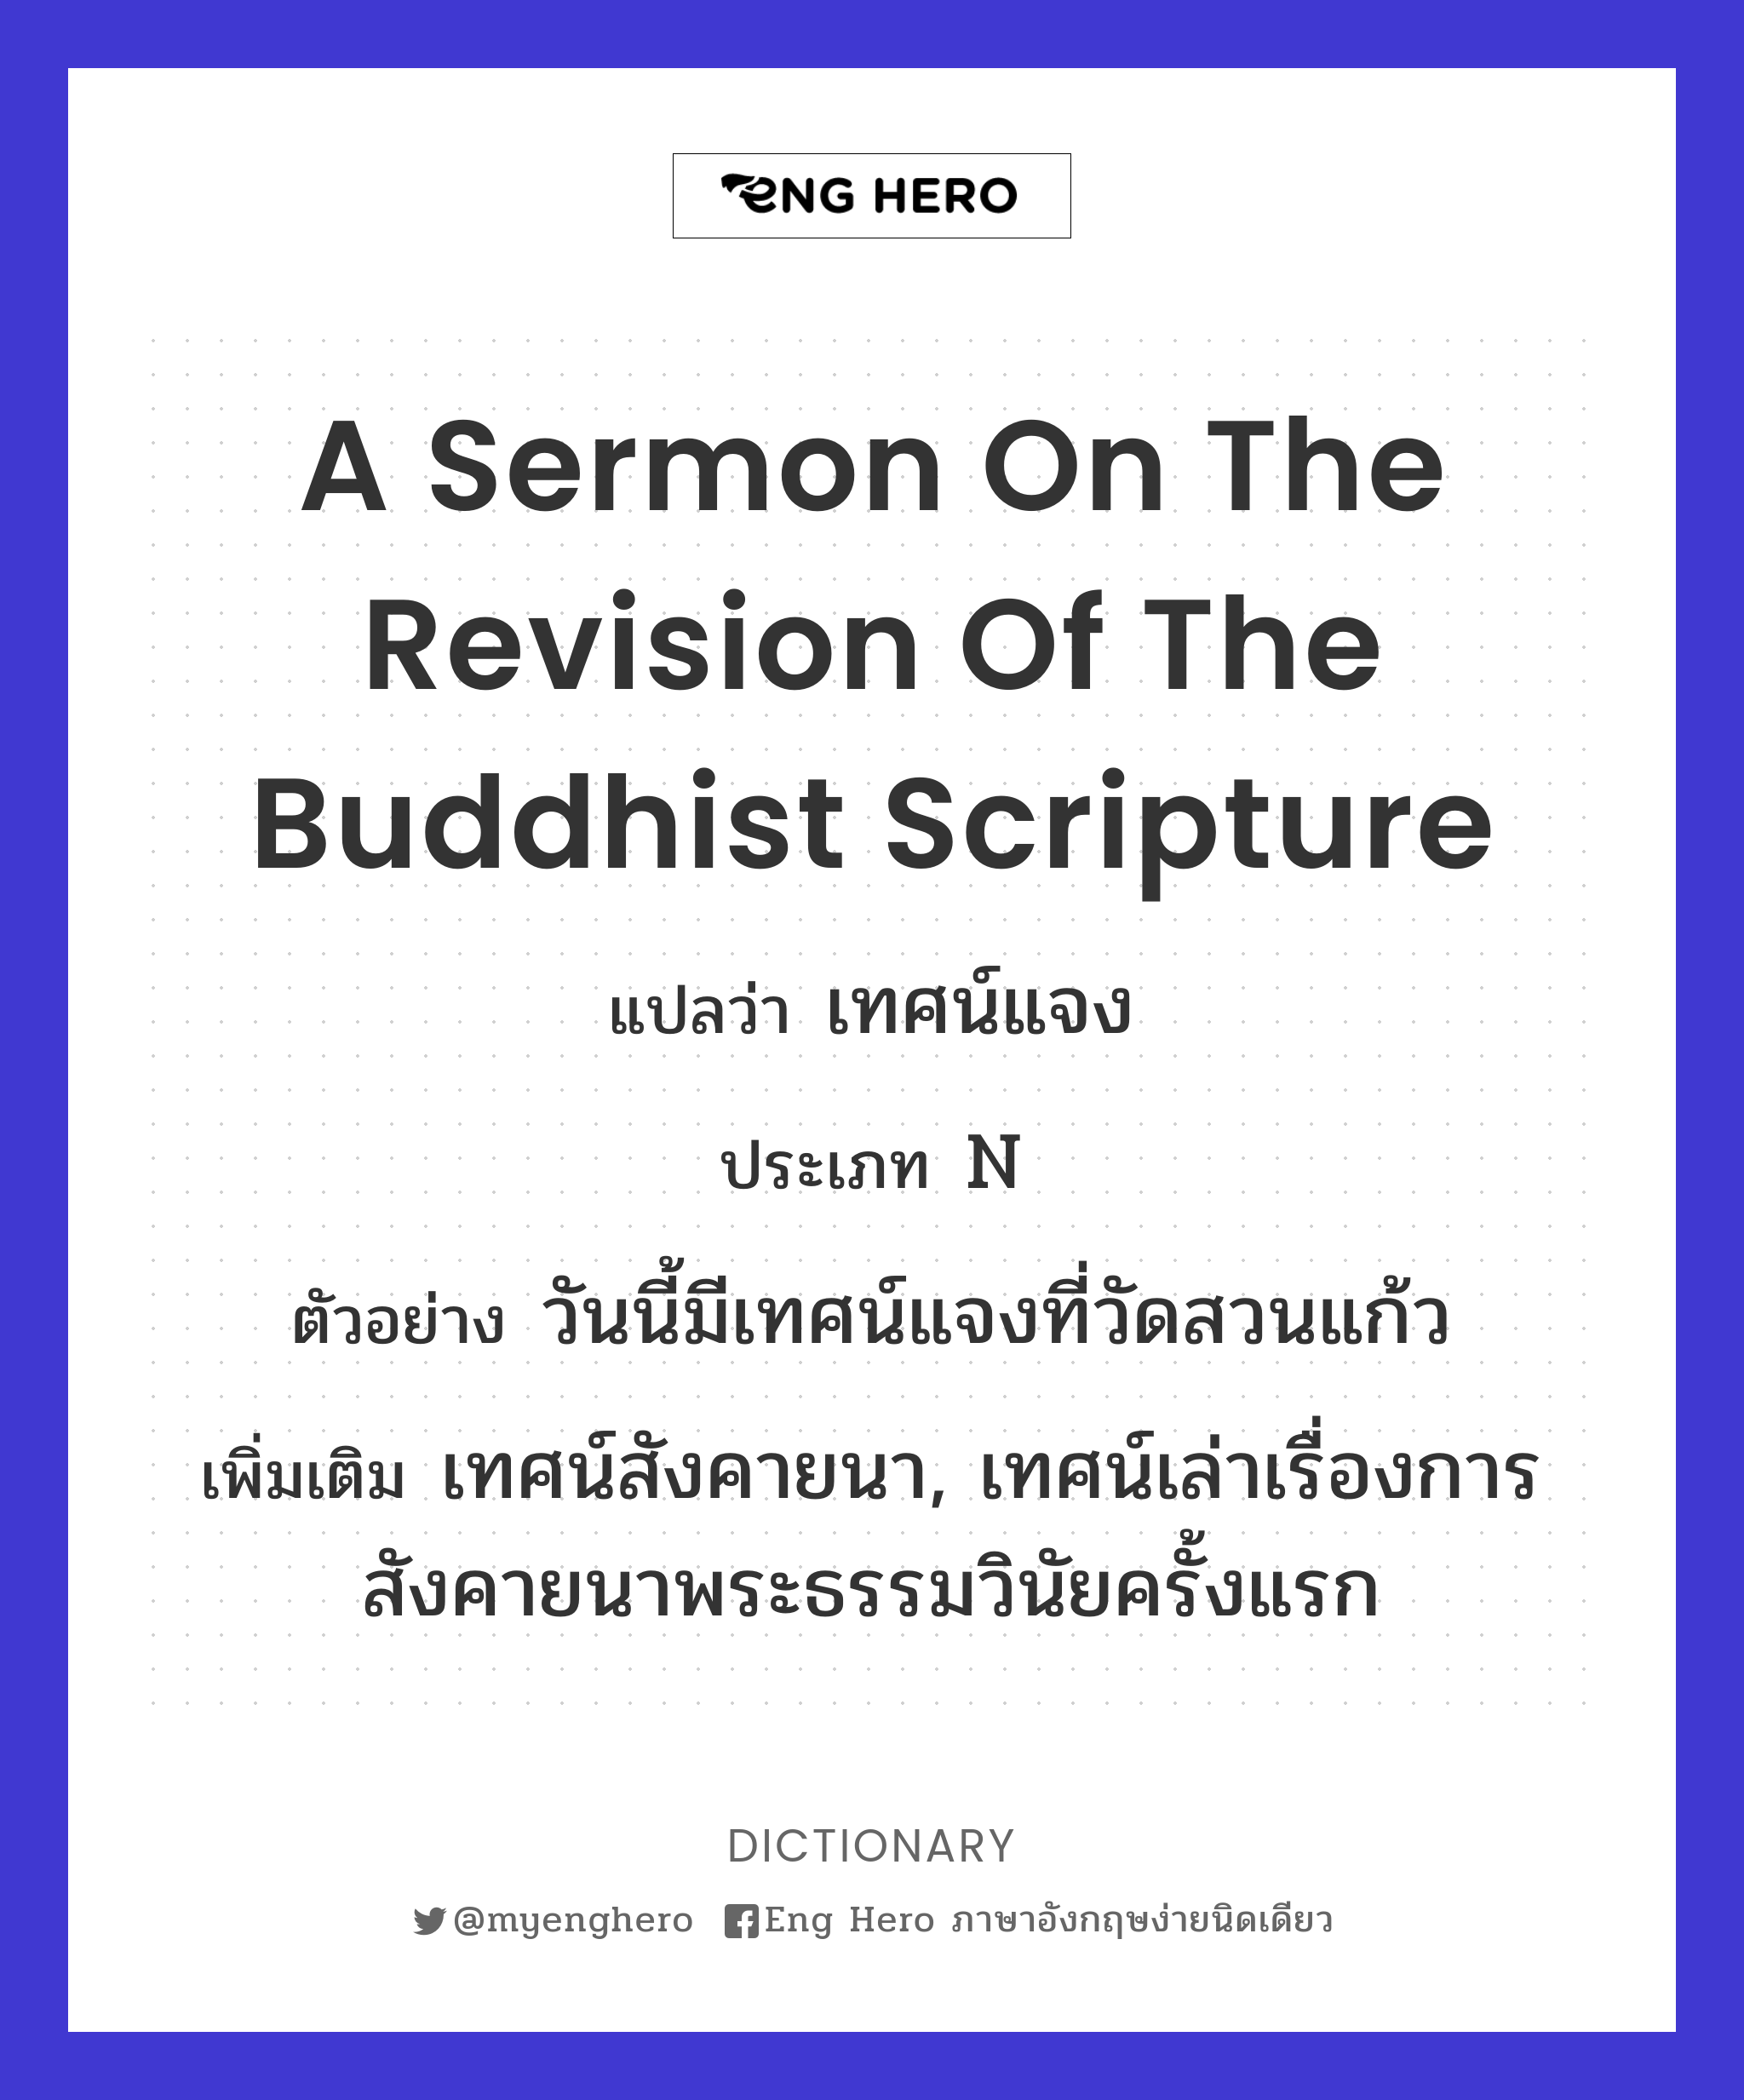 a sermon on the revision of the Buddhist scripture